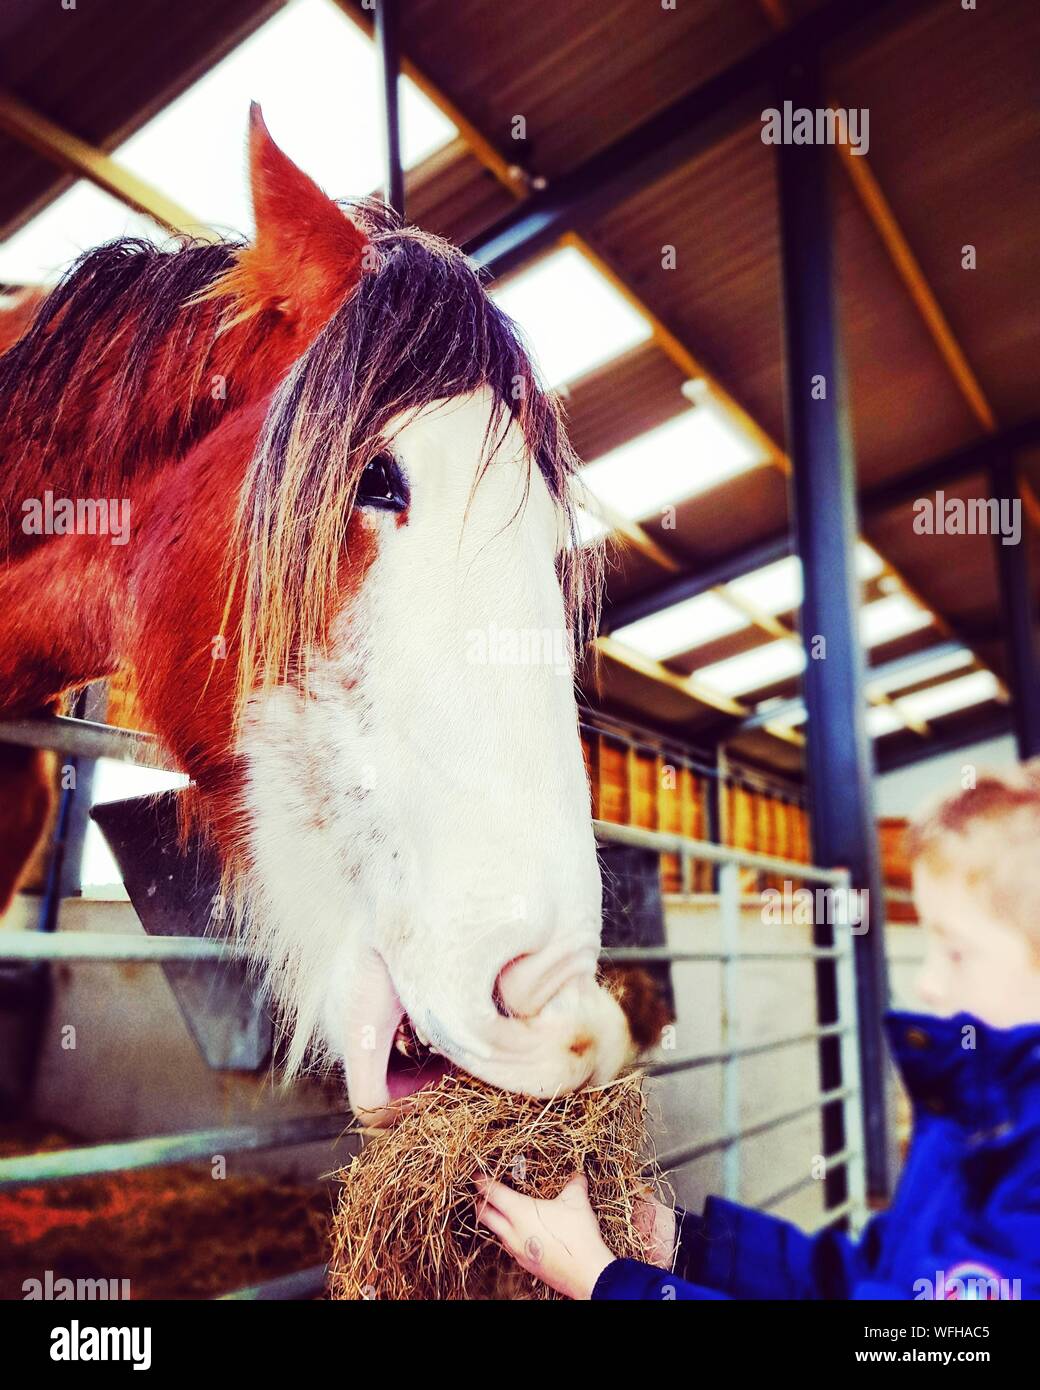 Boy Feeding Grass To Horse In Stable Stock Photo